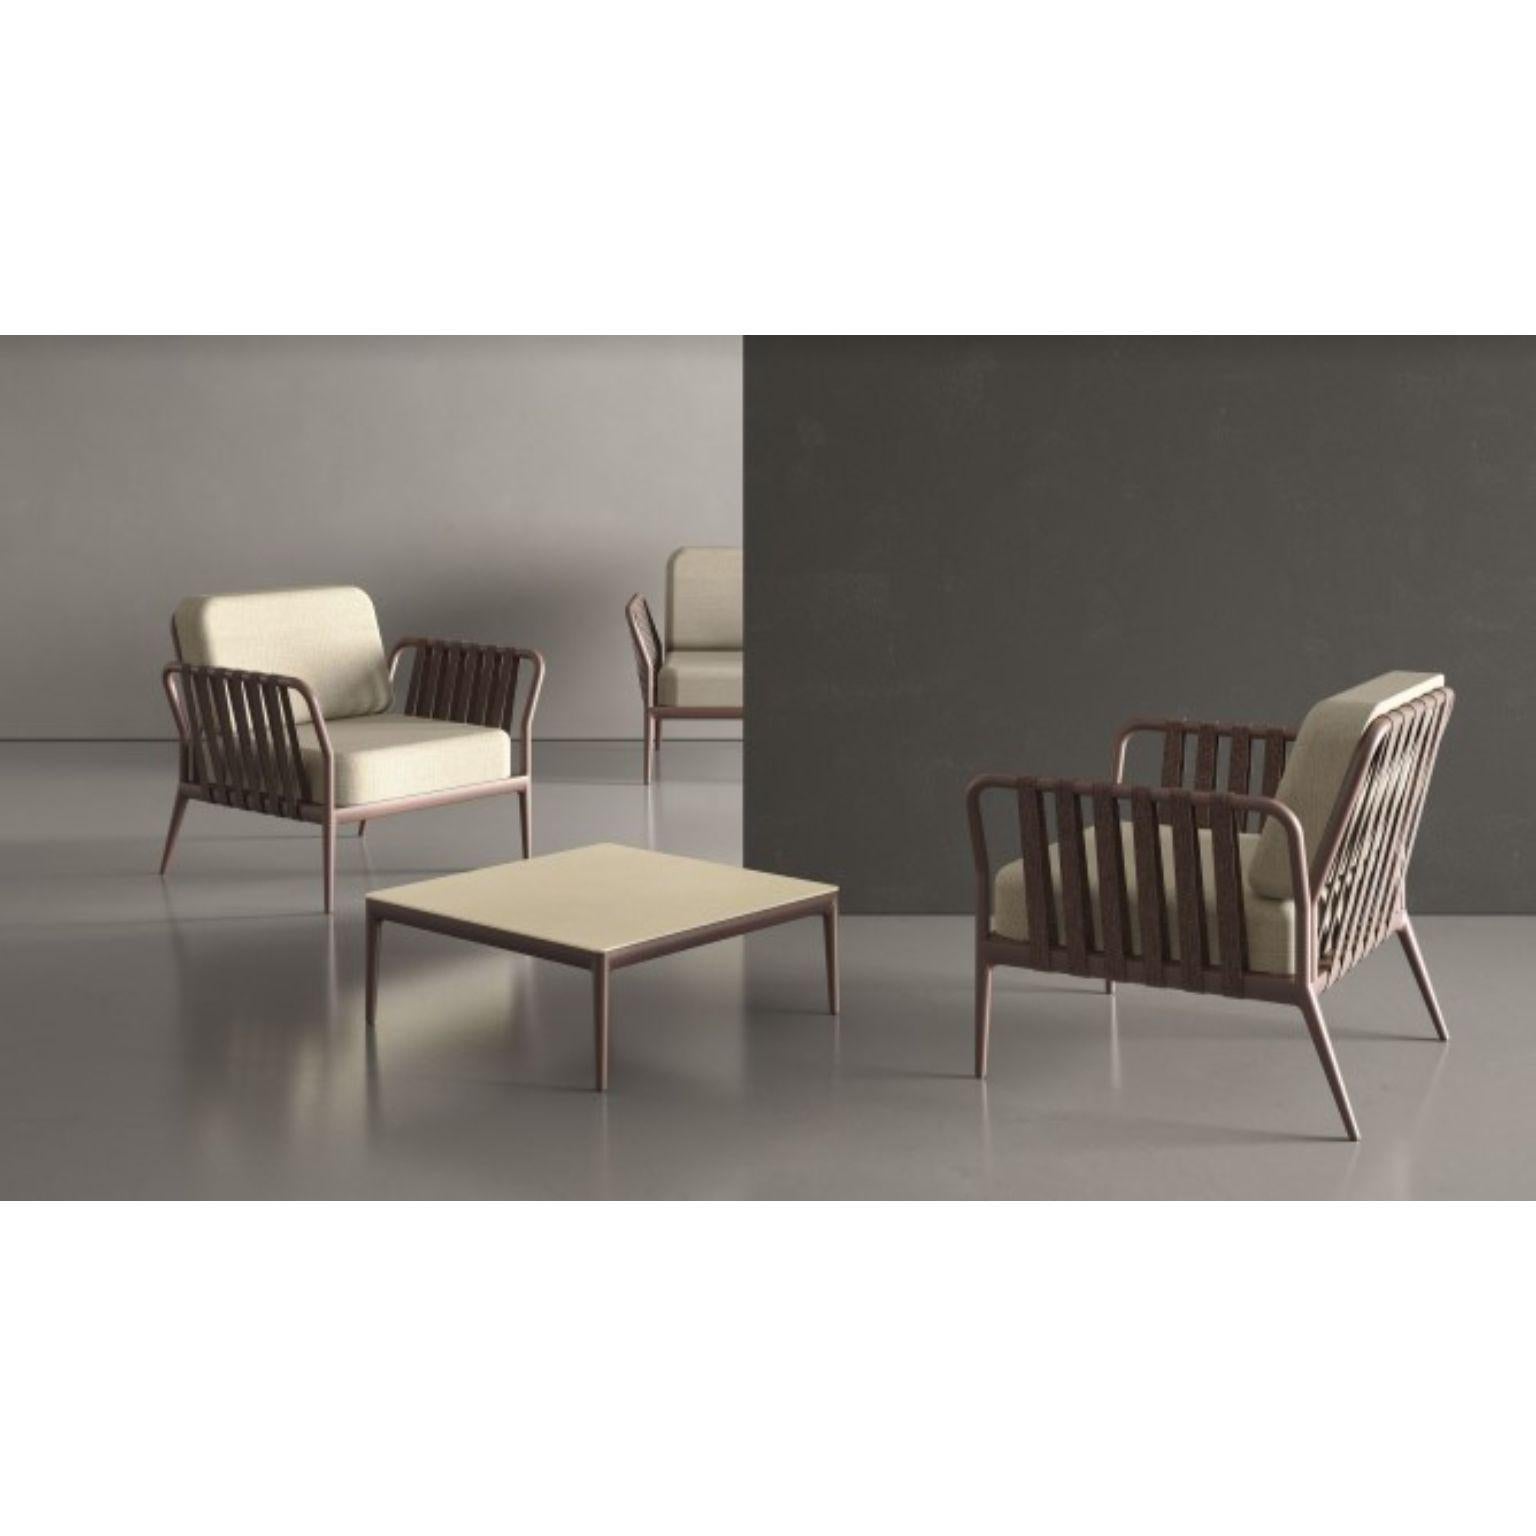 Post-Modern Ribbons White Armchair by Mowee For Sale